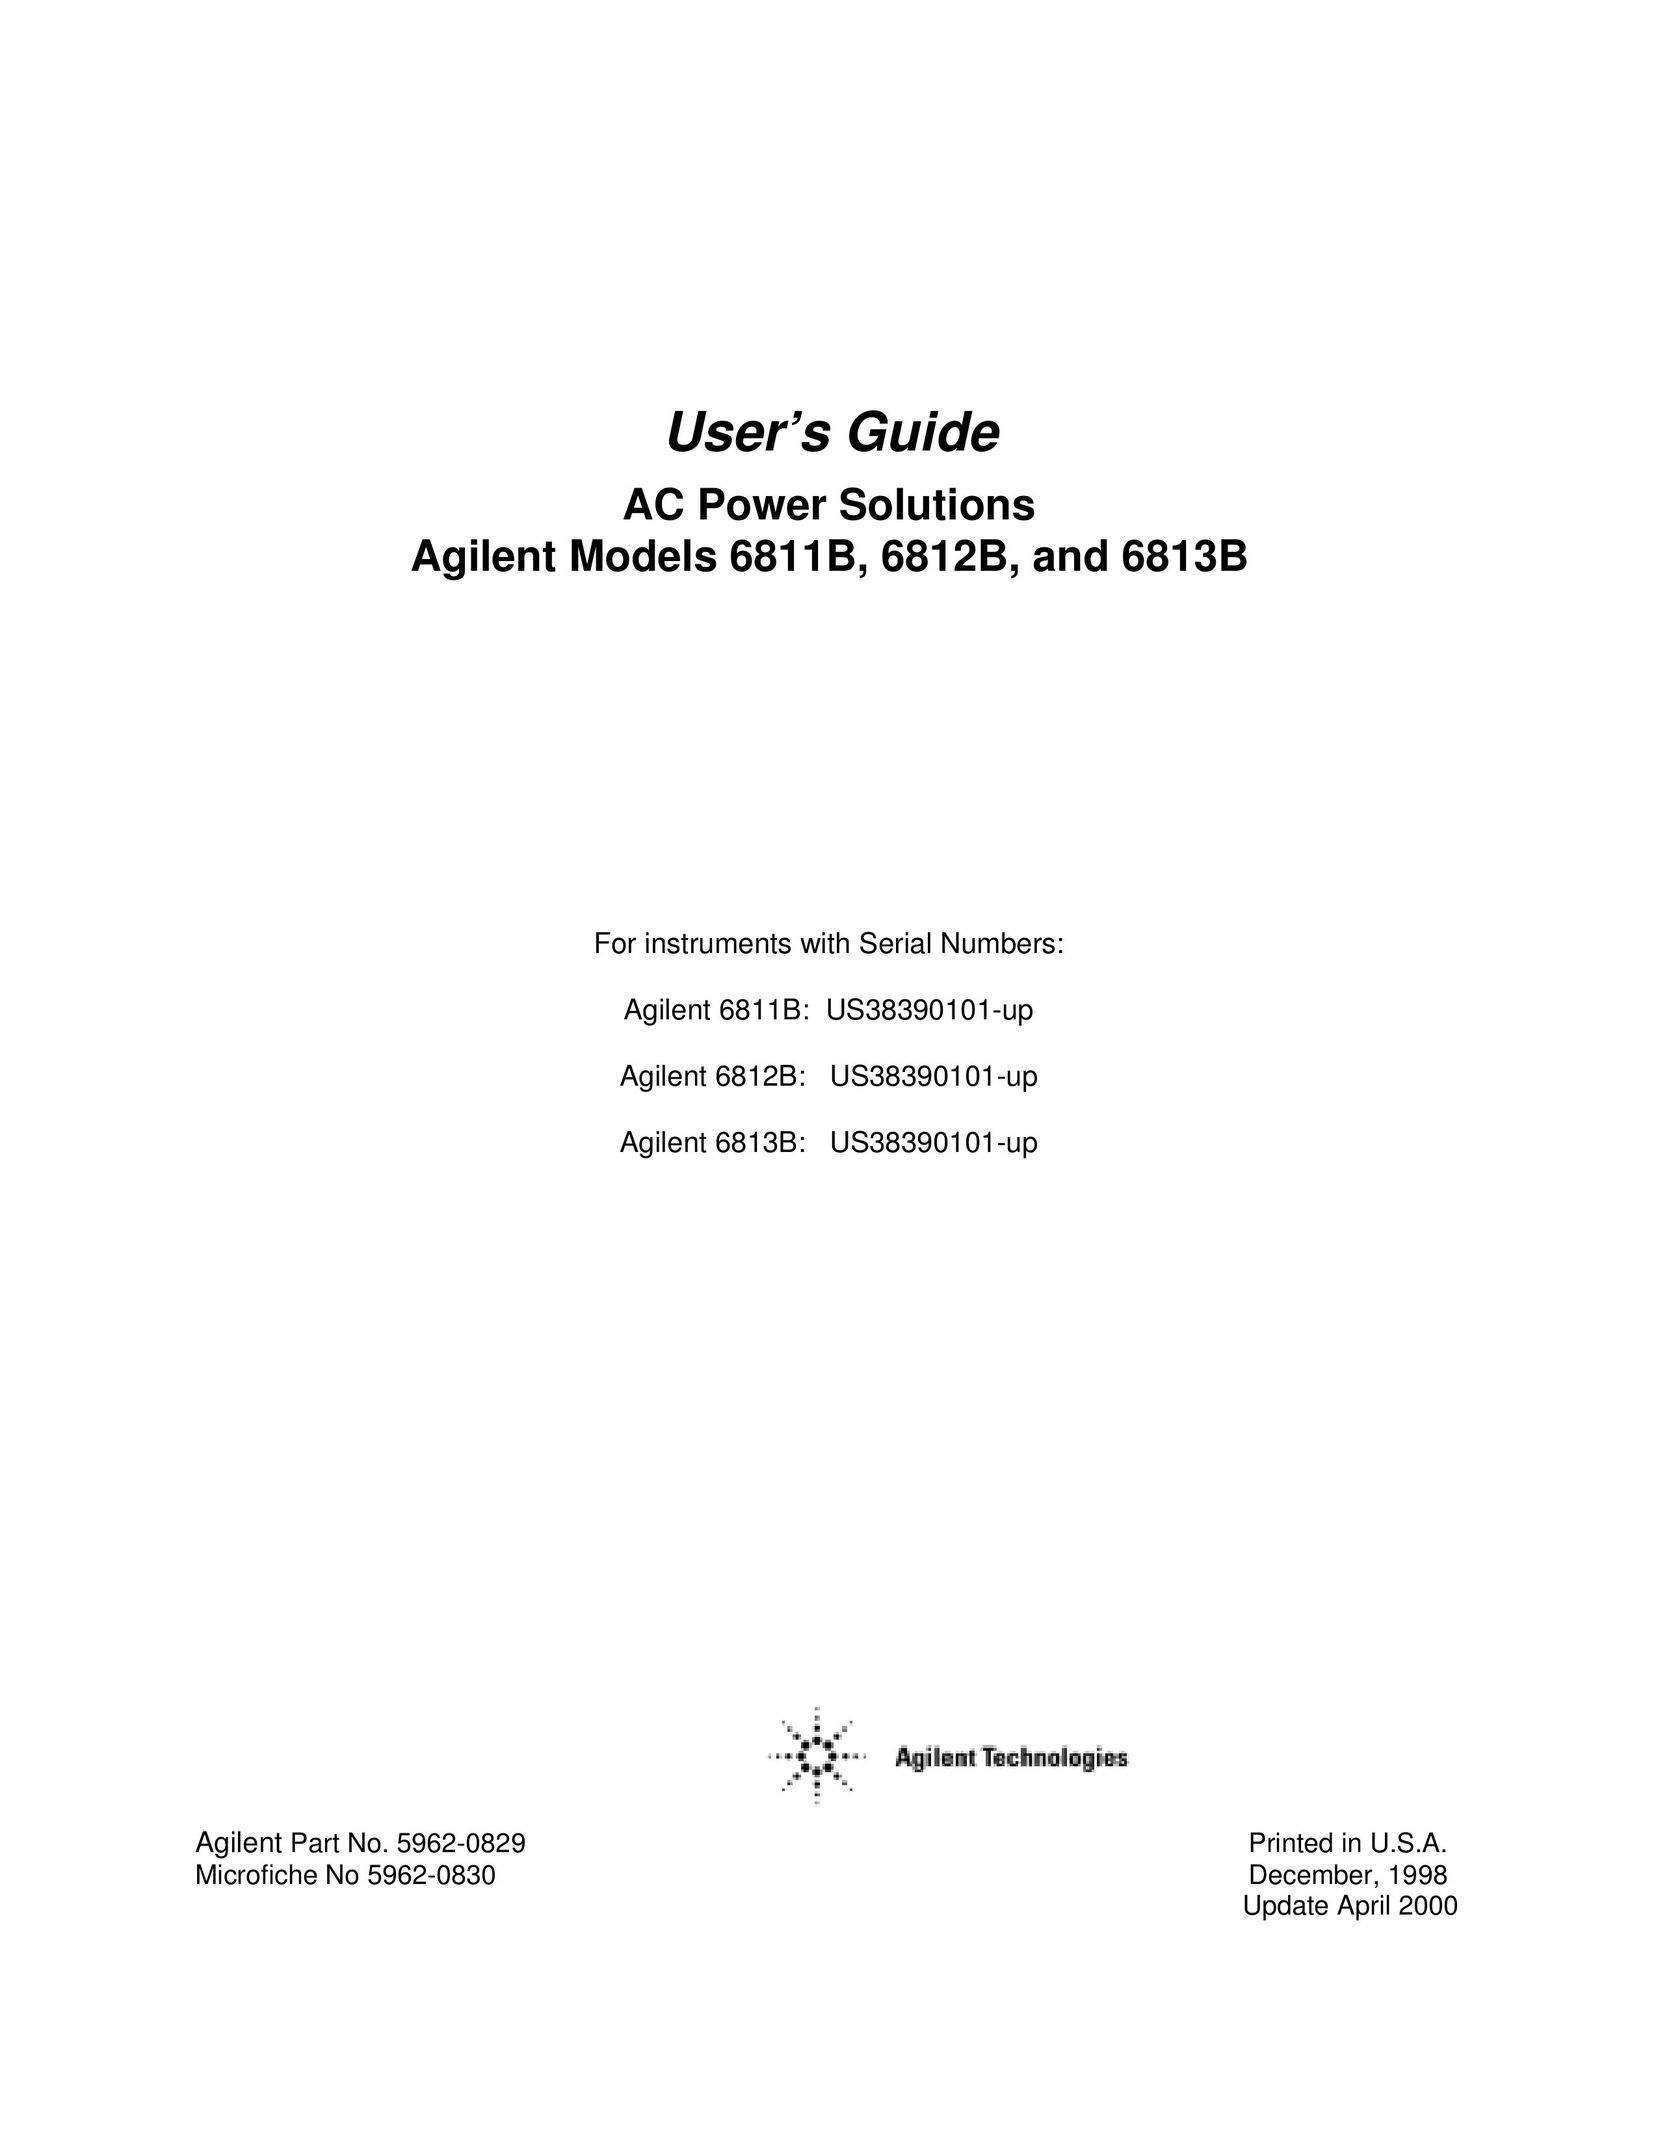 Agilent Technologies 6812B Video Gaming Accessories User Manual (Page 1)